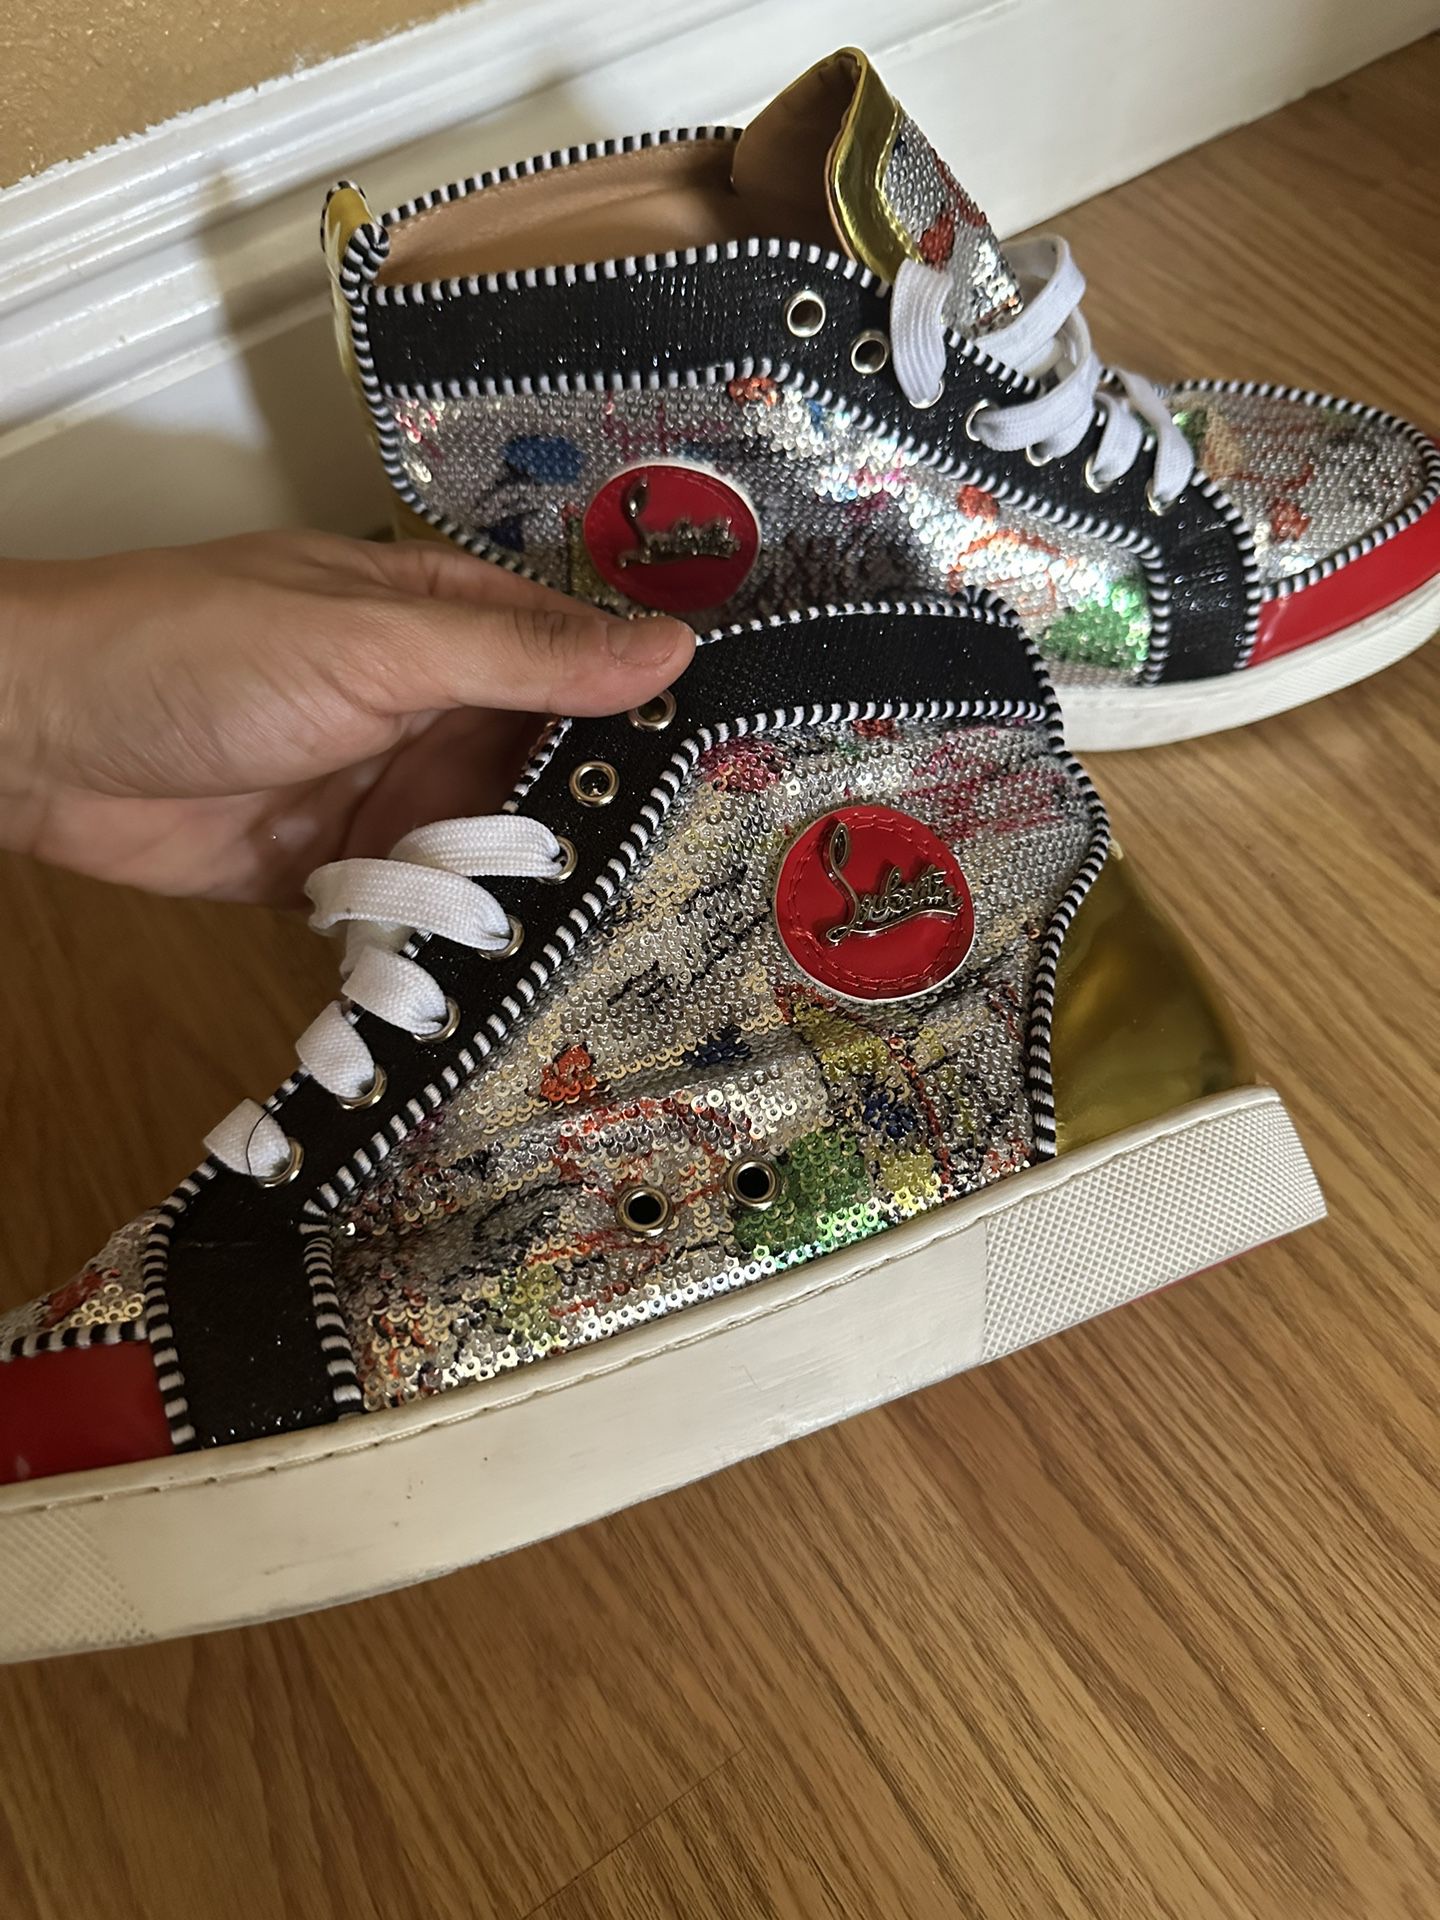 Low Top Christian Louboutin Men Sneaker Black With Red for Sale in Pico  Rivera, CA - OfferUp